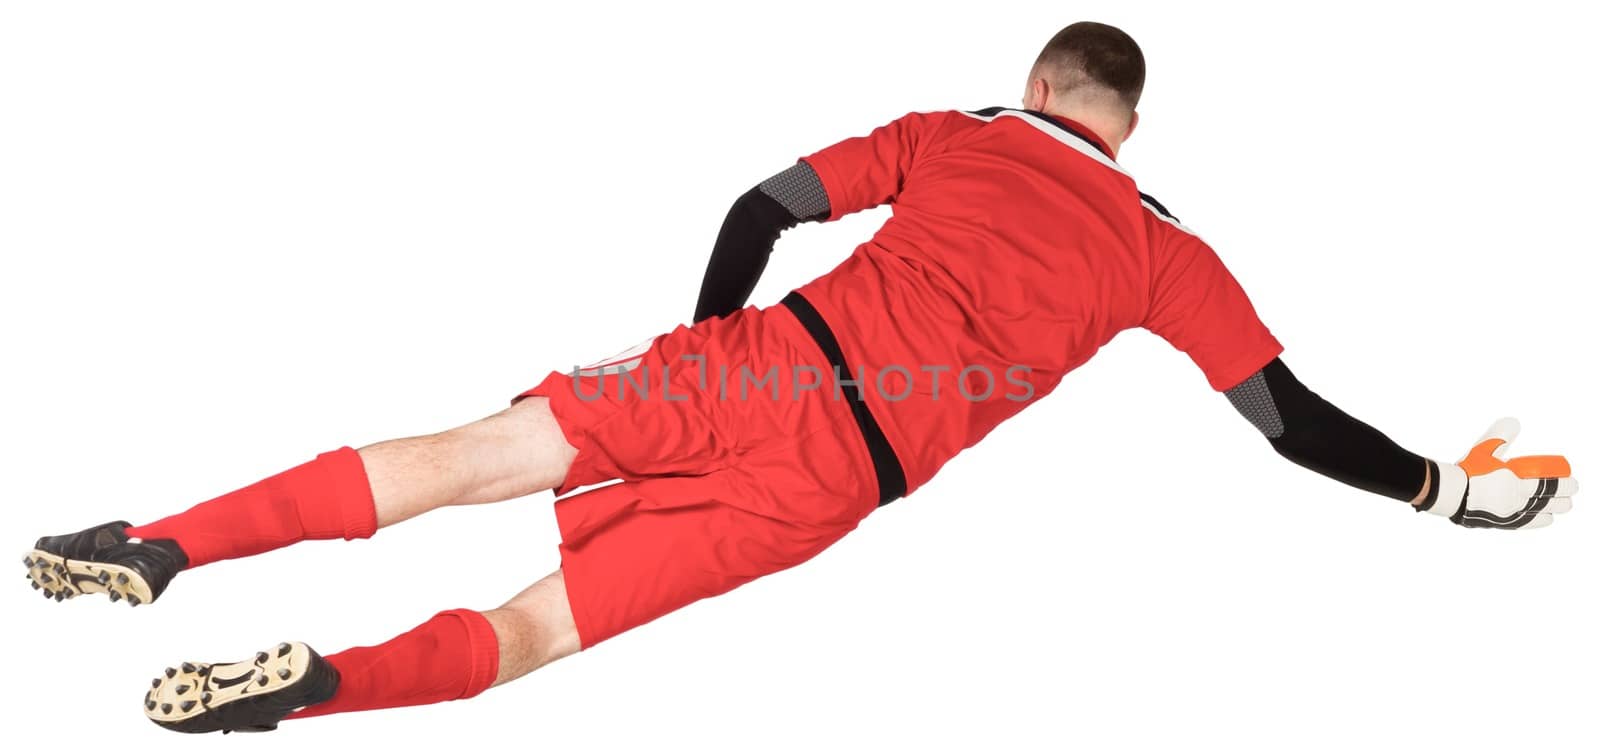 Fit goal keeper jumping up on white background